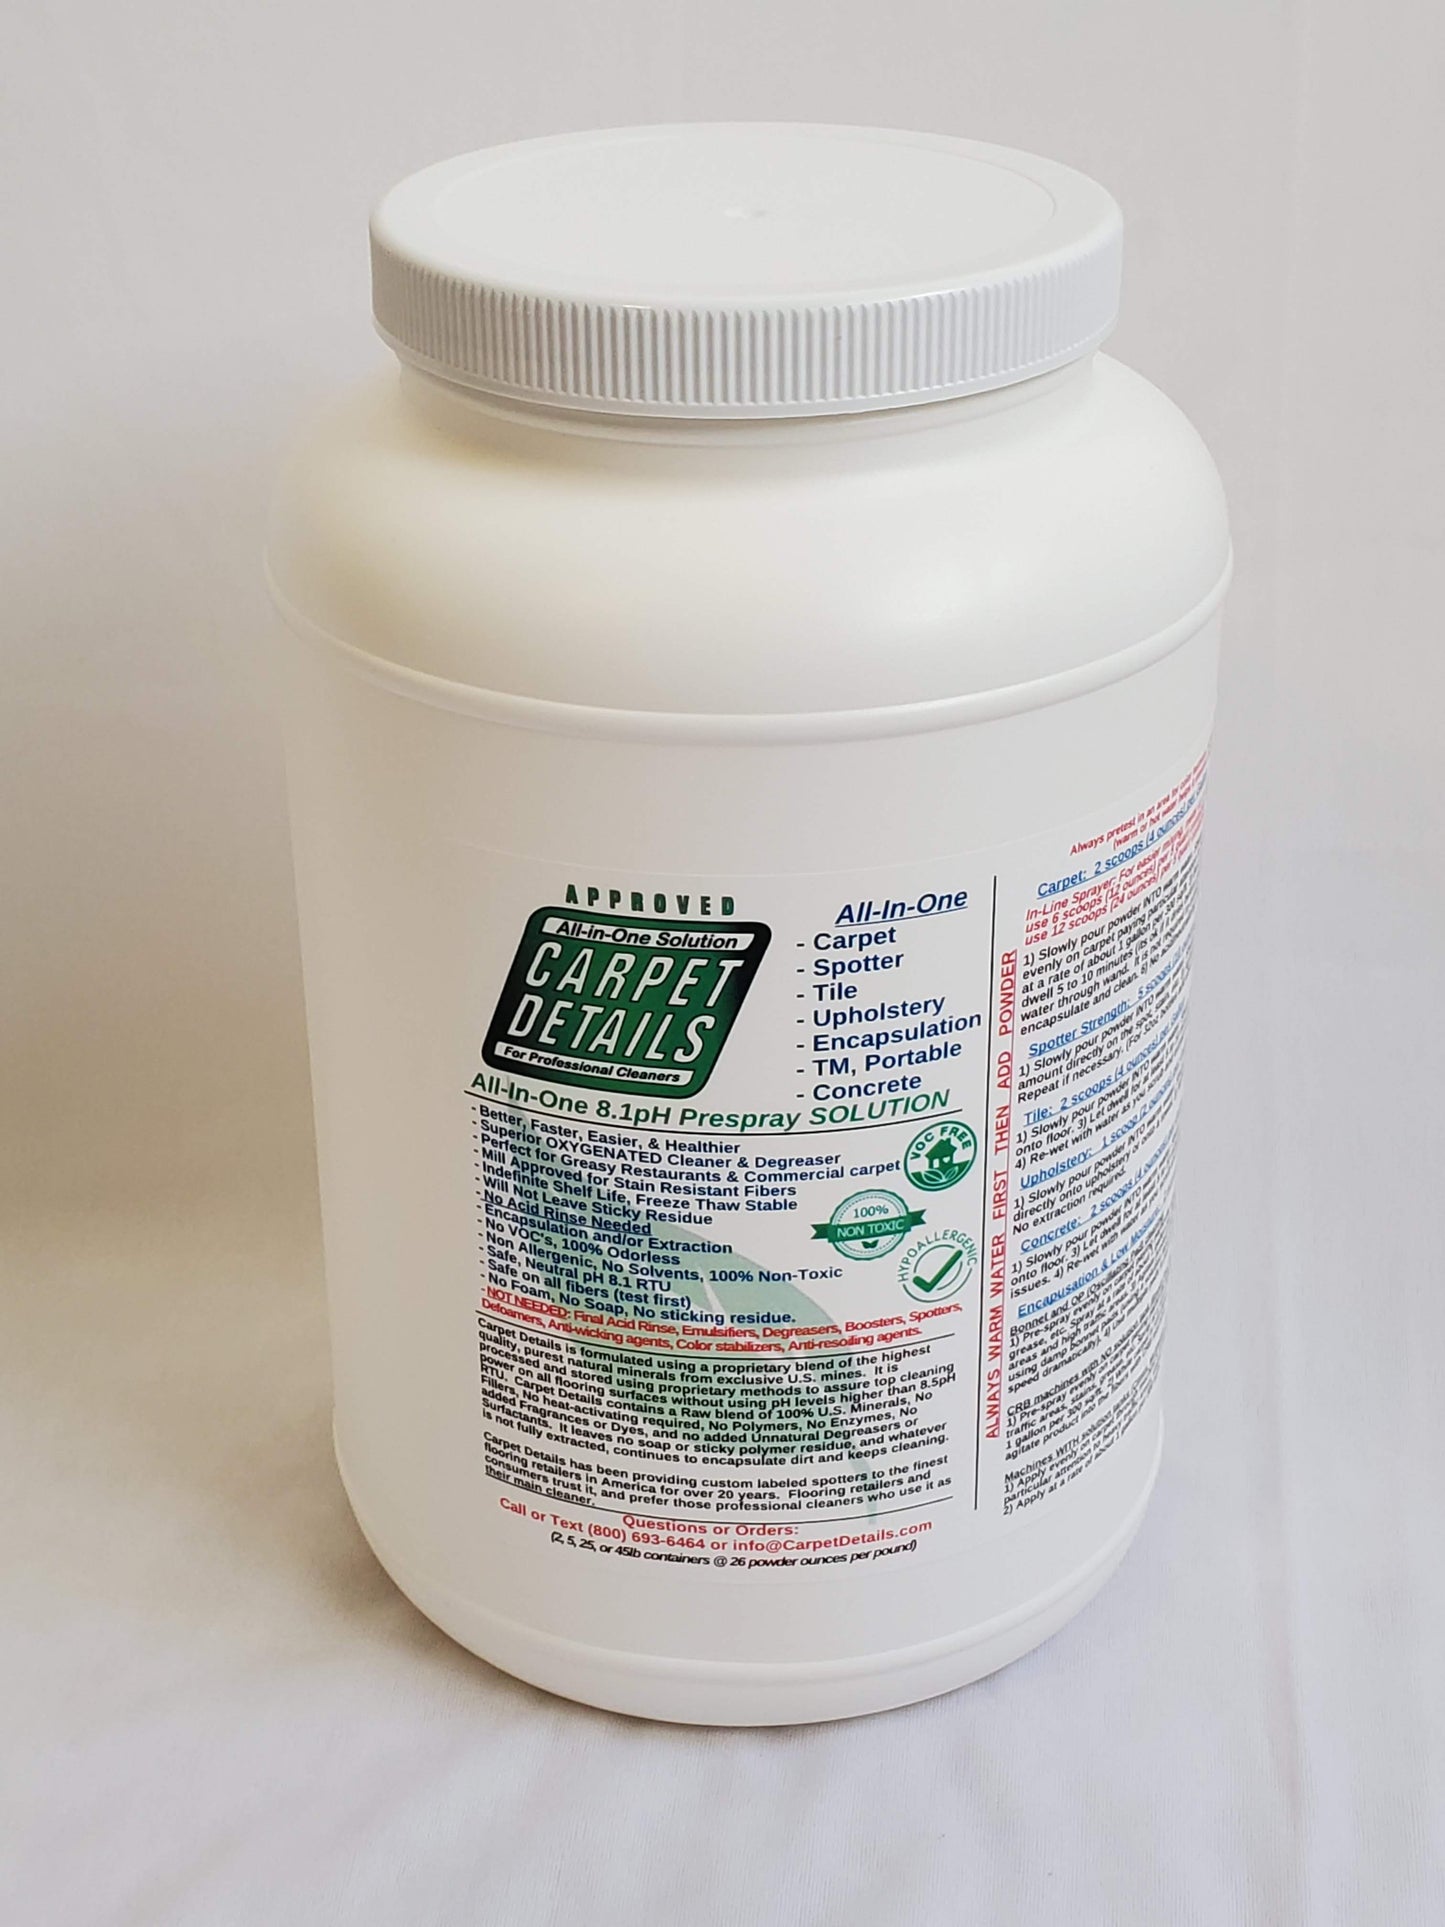 5lb (FREE SHIPPING) 1 Gal container of Professional Carpet Details All in One Prespray